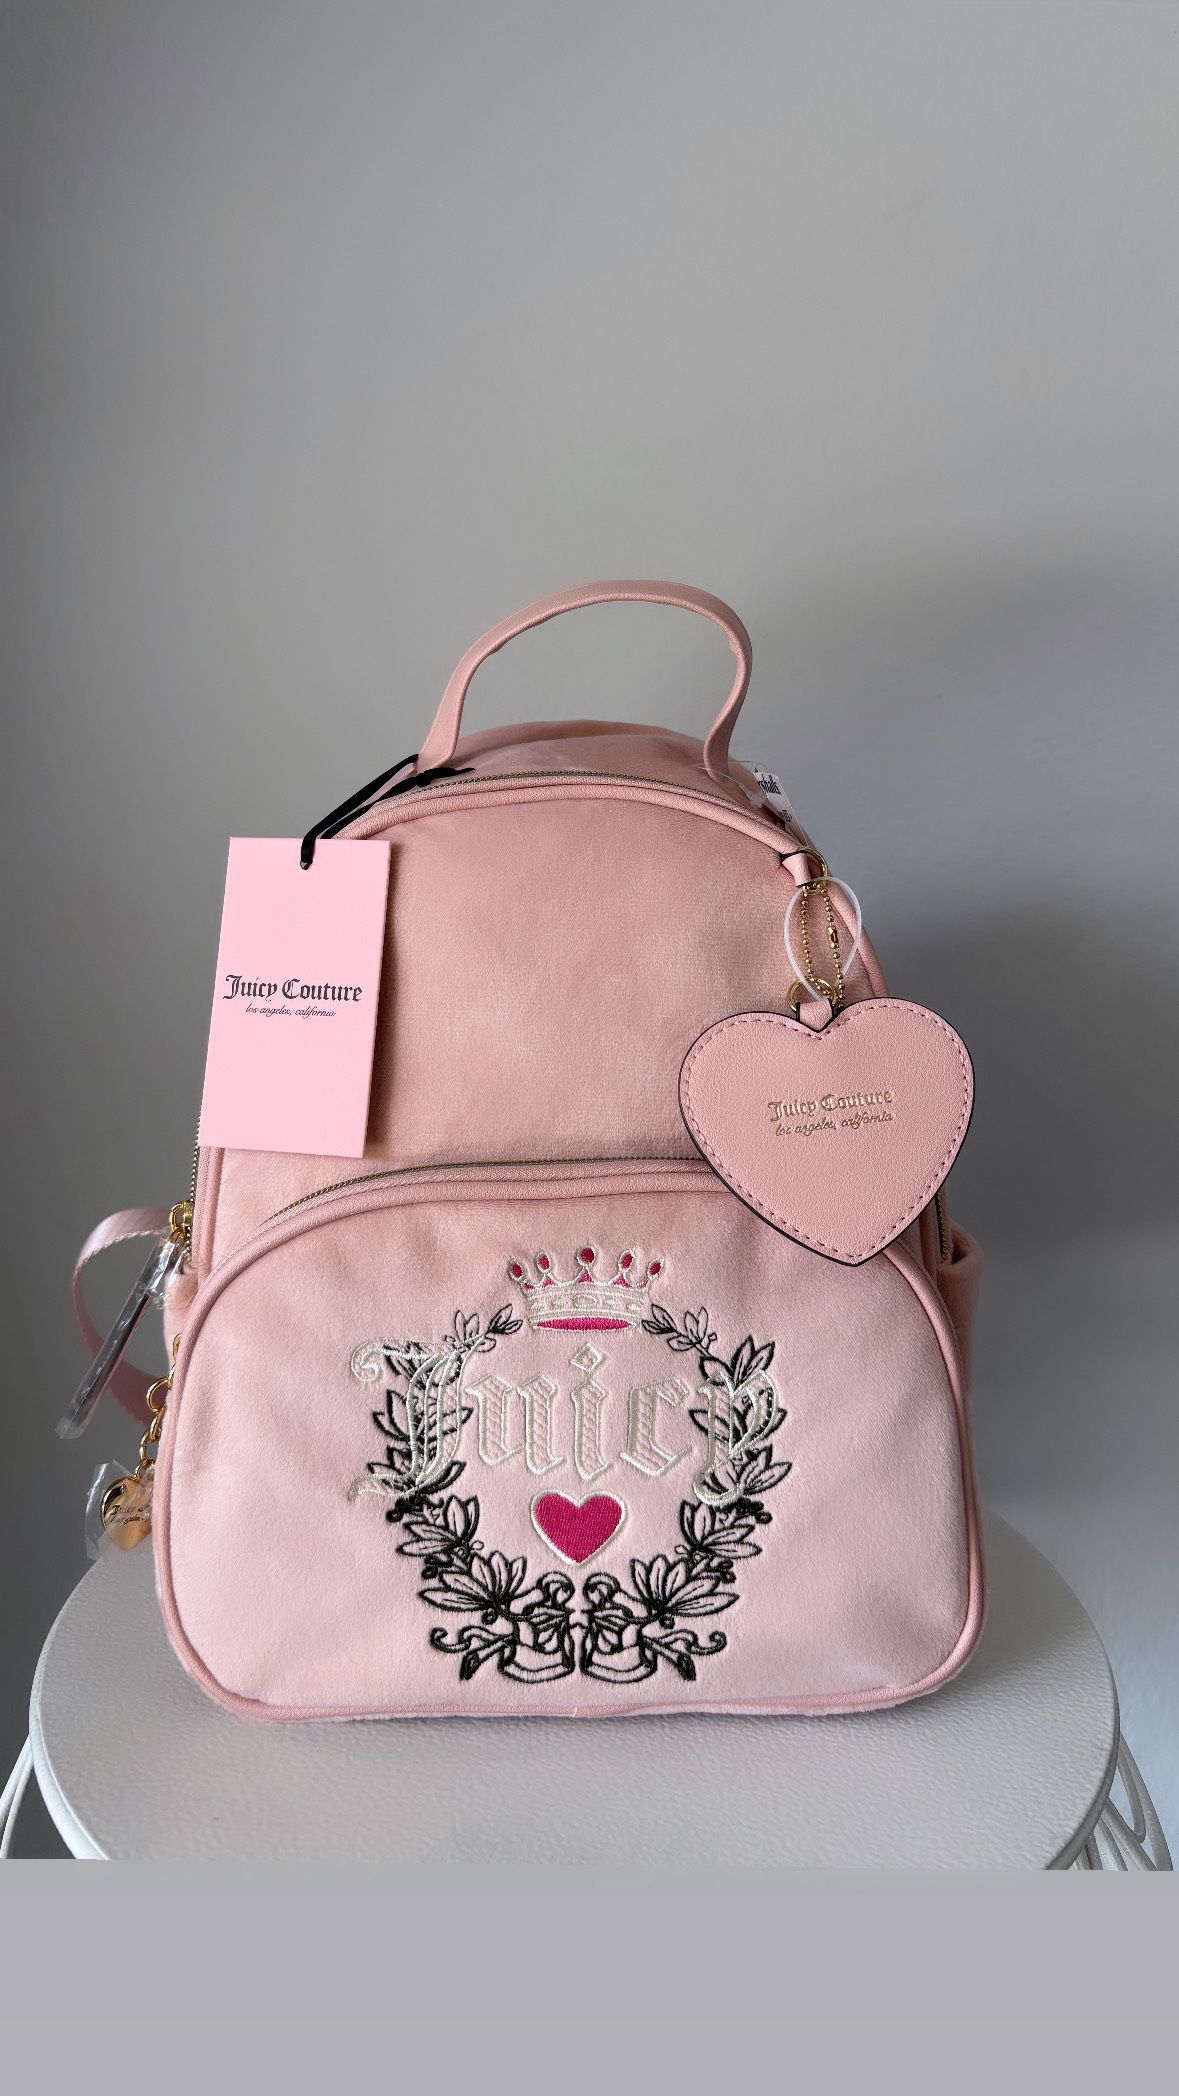 New Pink Juicy Couture Backpack Purse